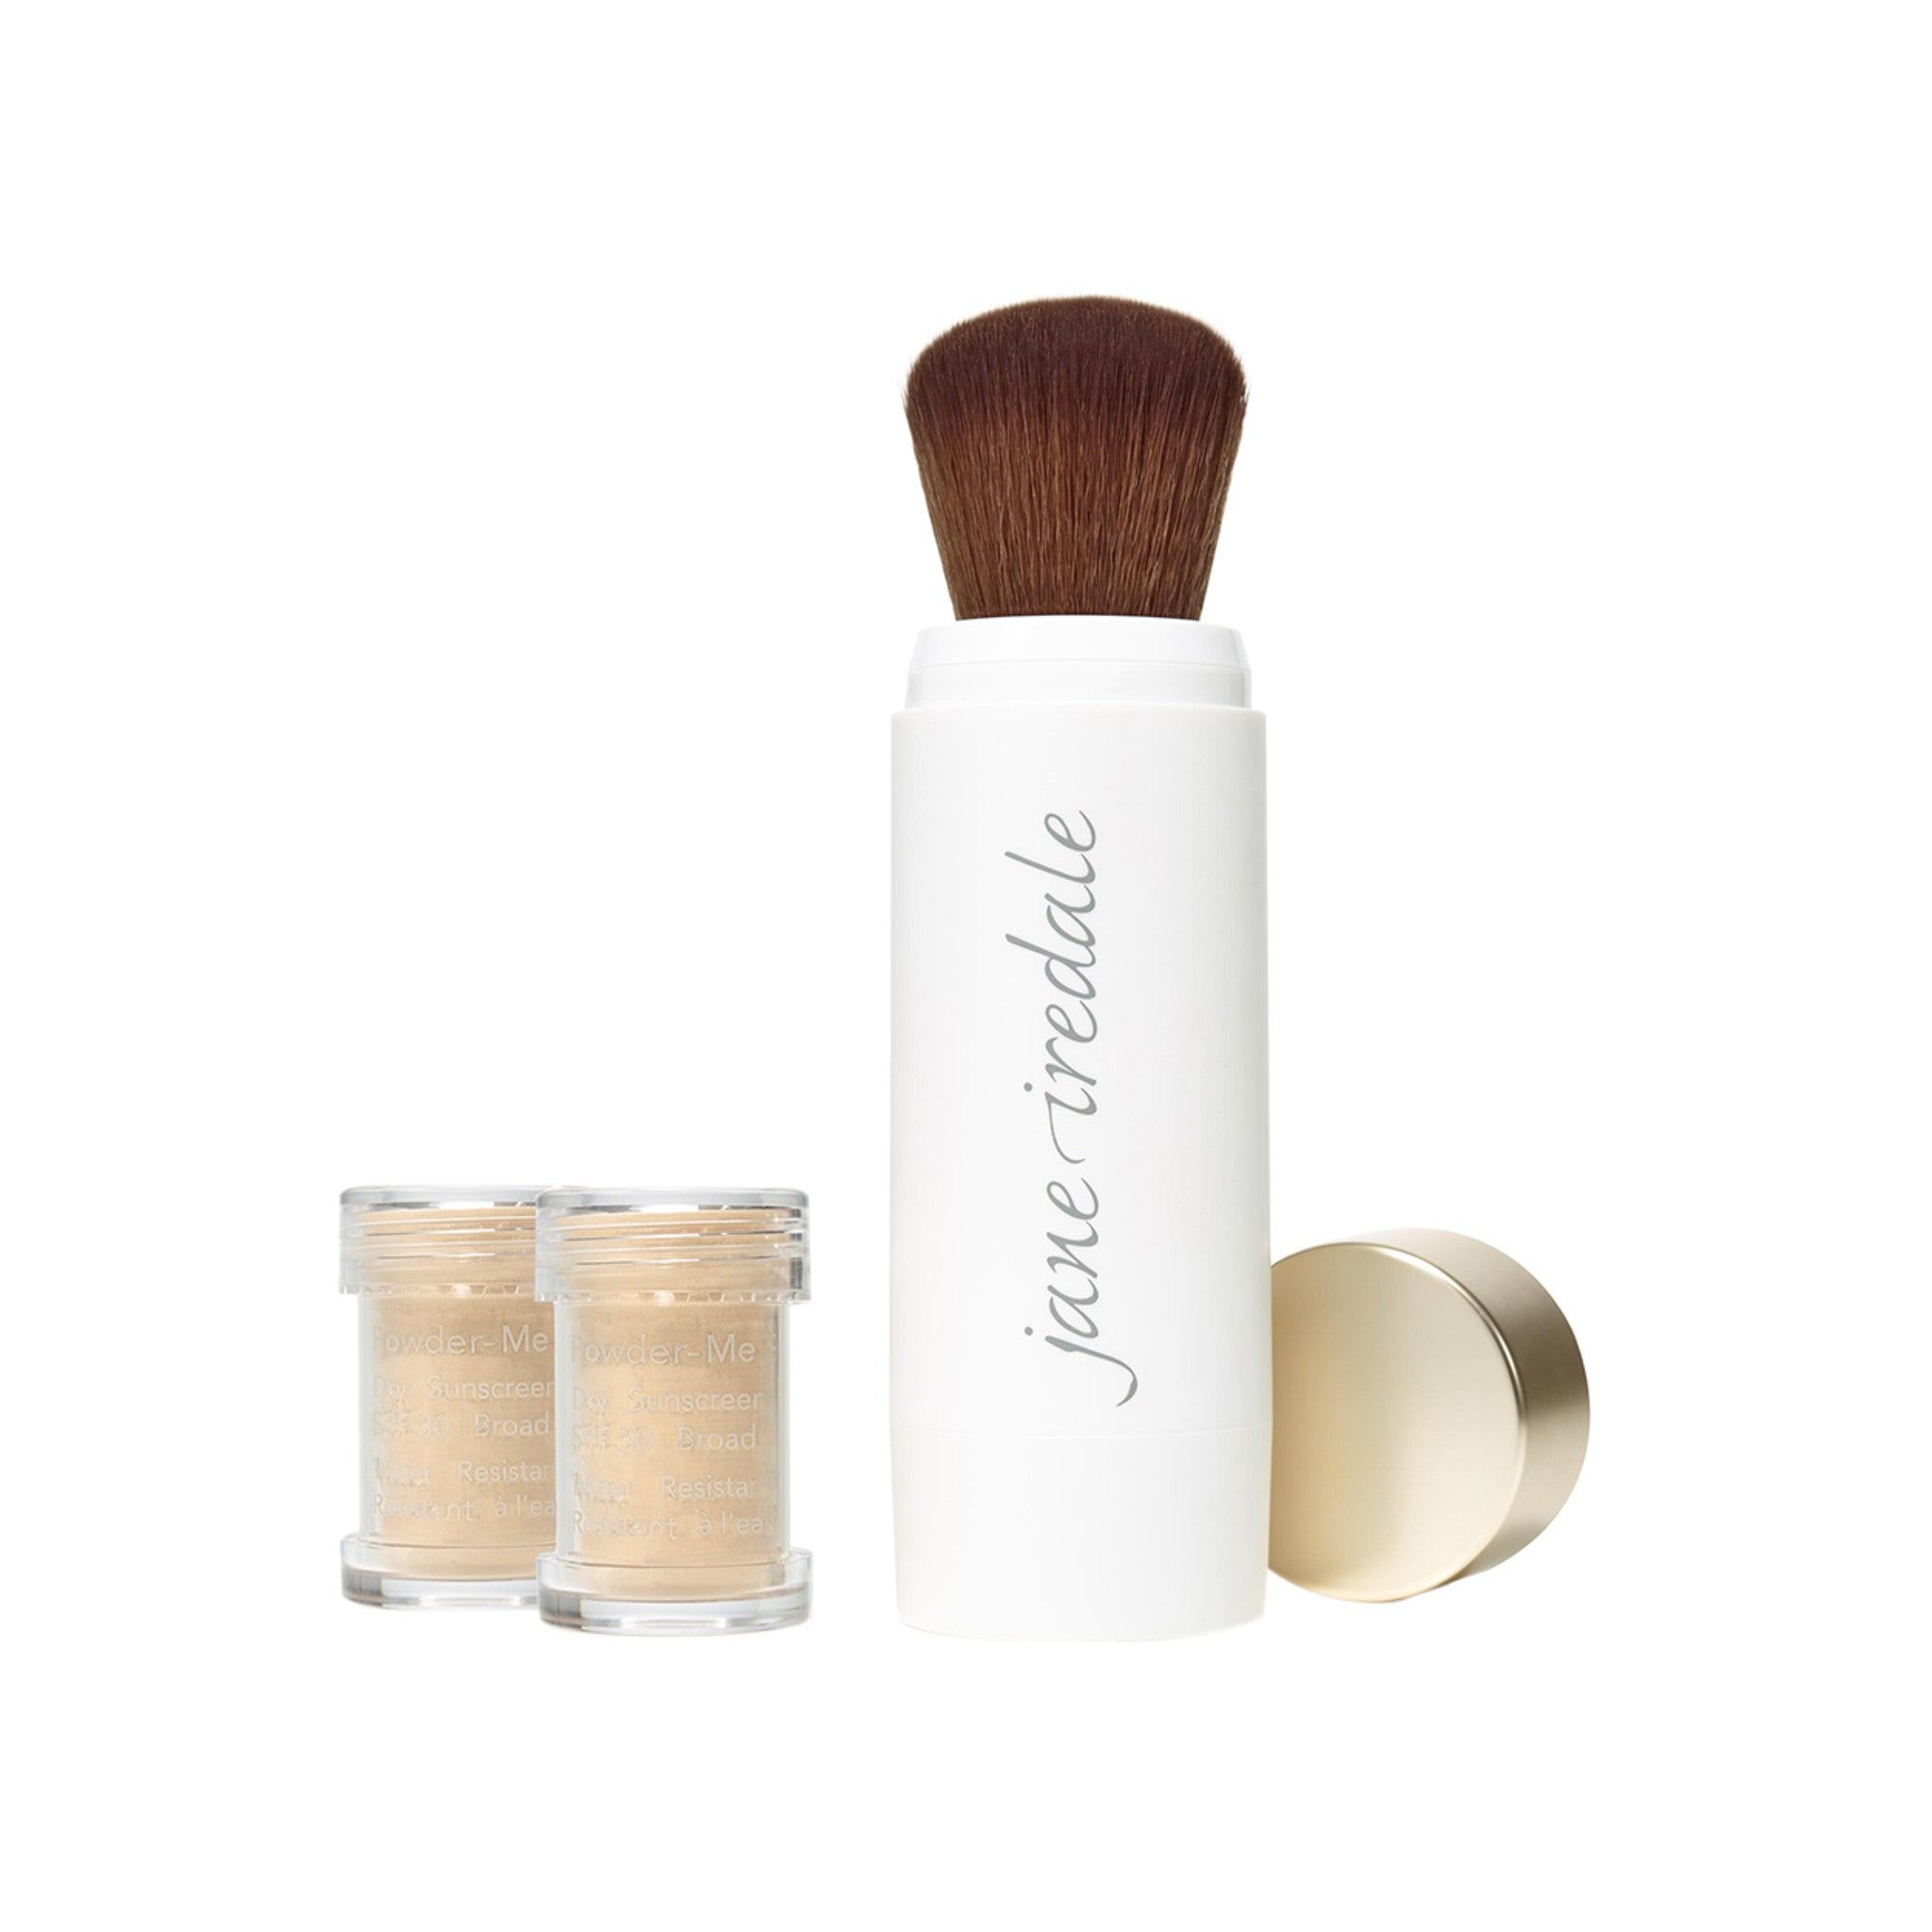 Jane Iredale Powder-Me Dry Sunscreen SPF 30 Color/Shade variant: Golden main image.